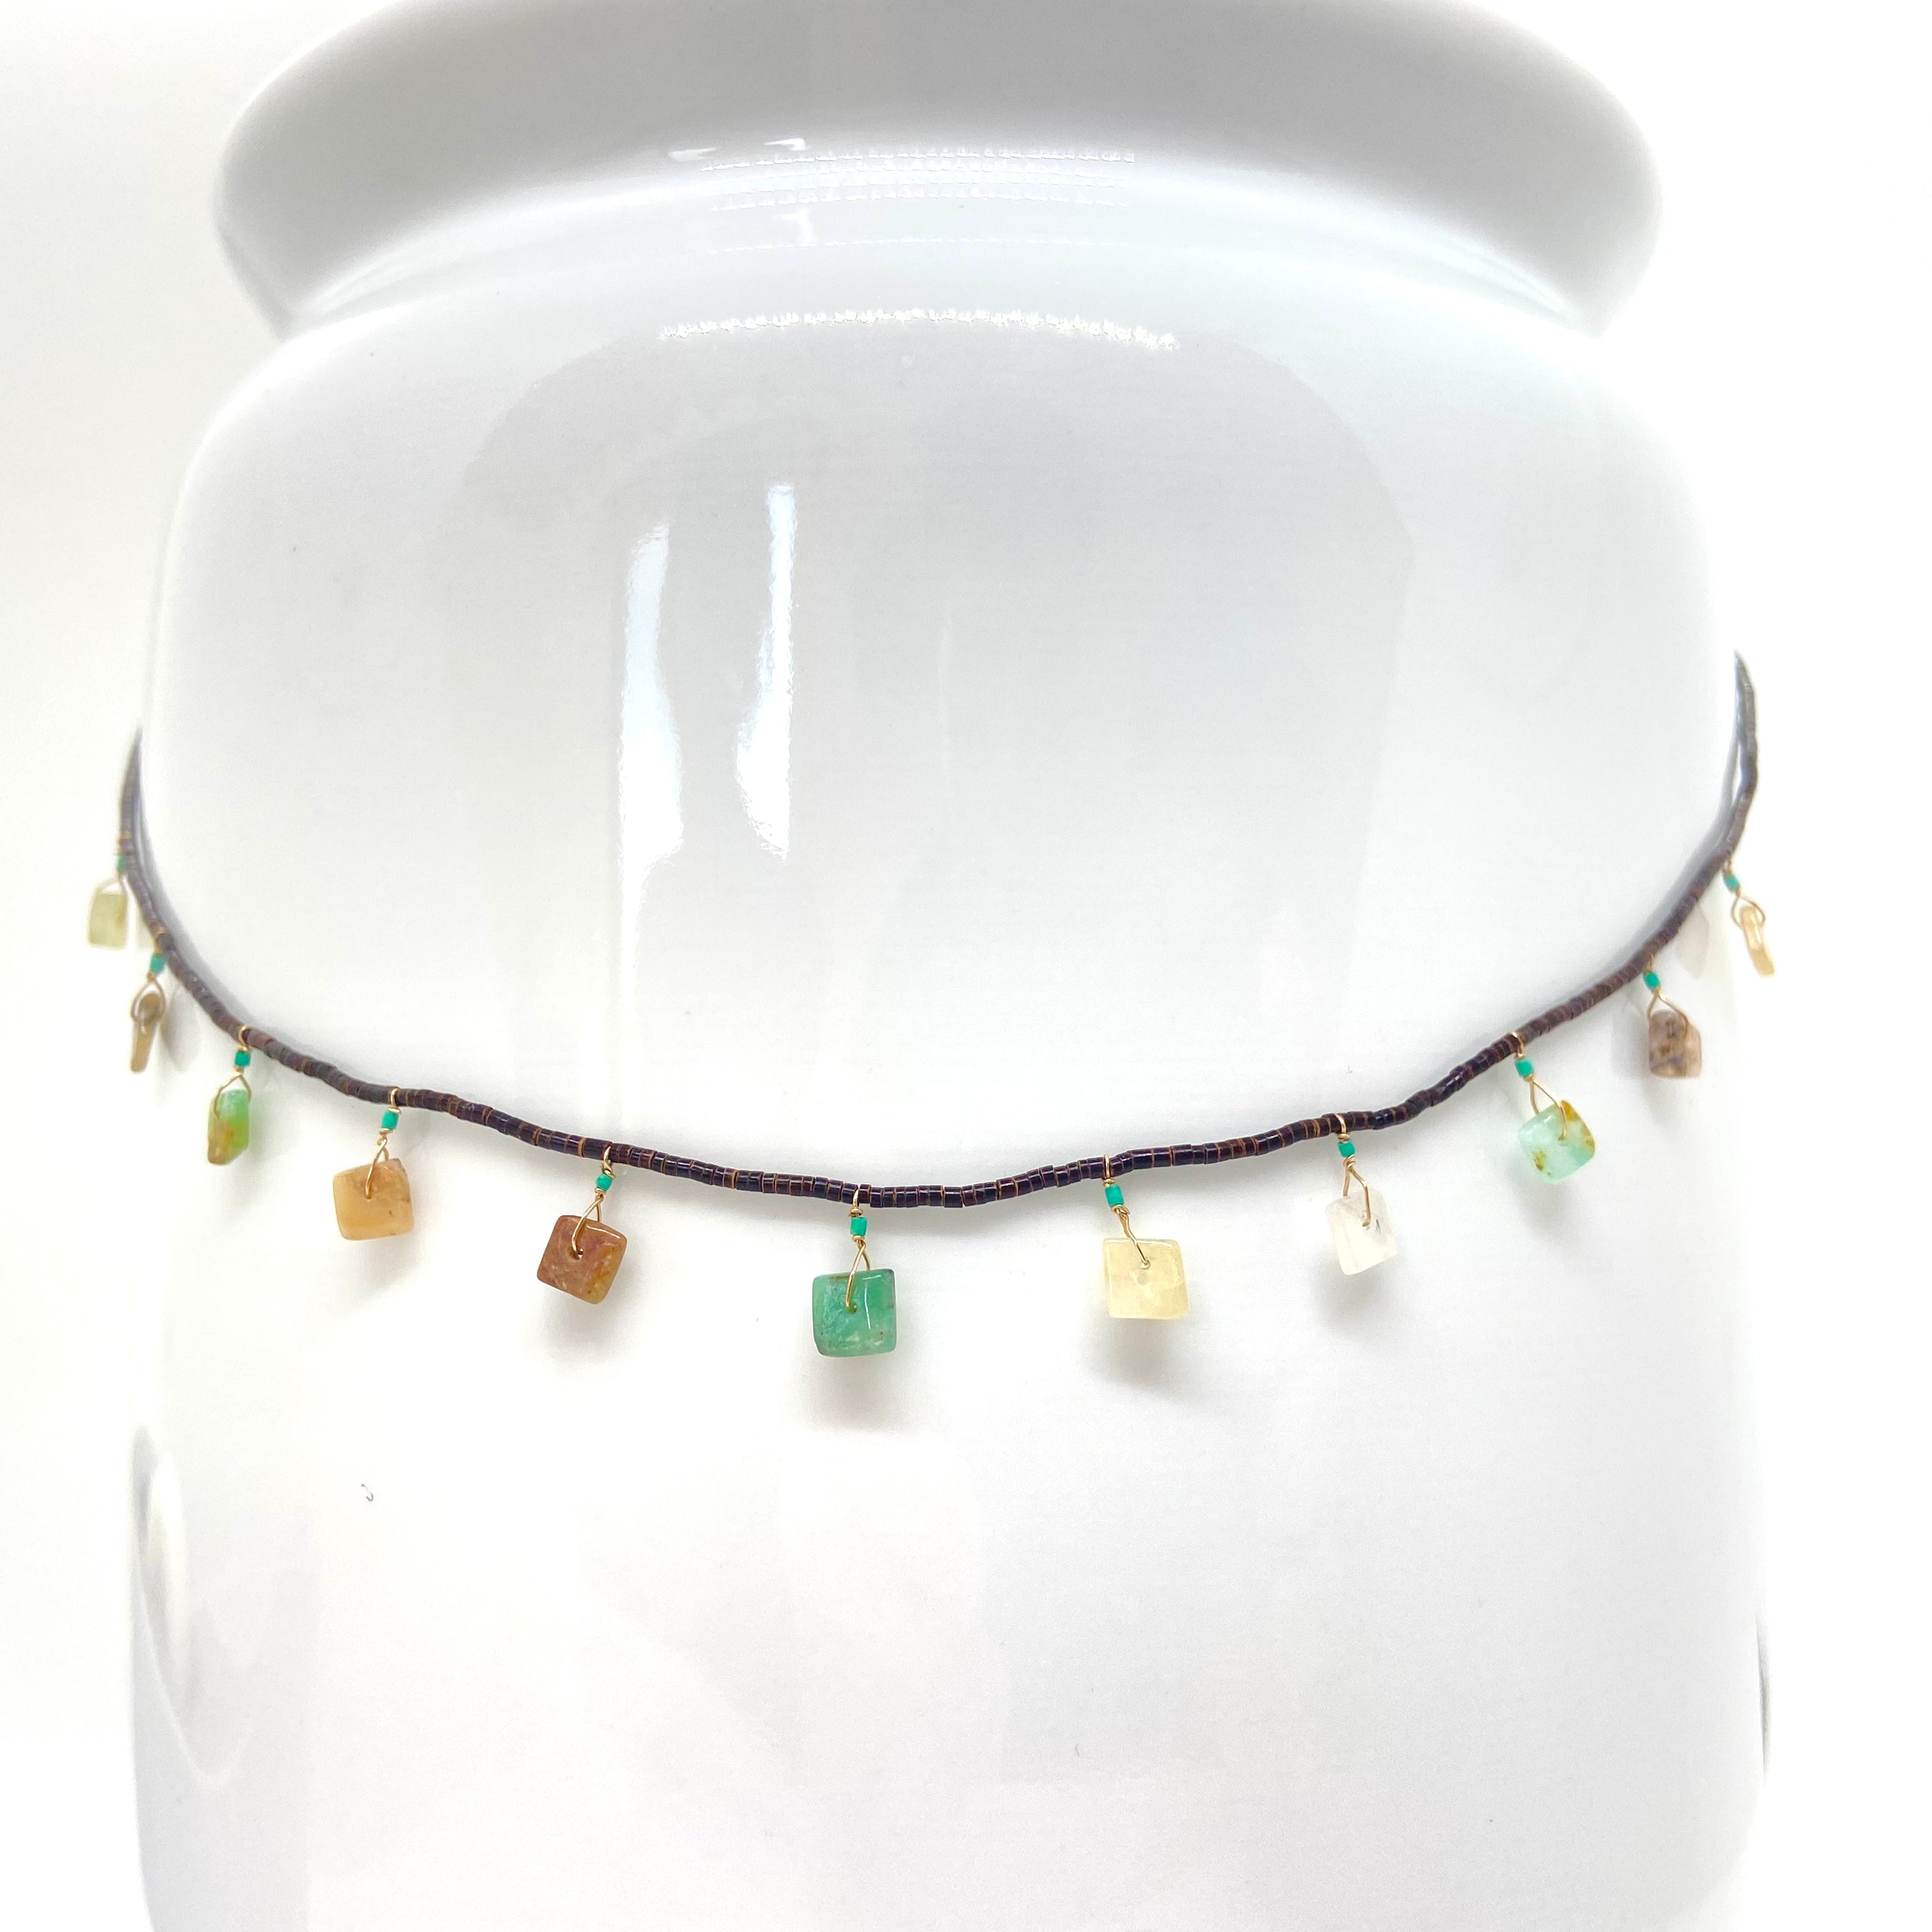 String Beaded Necklace w/ Opal, Turquoise Tucum Coconut Beads